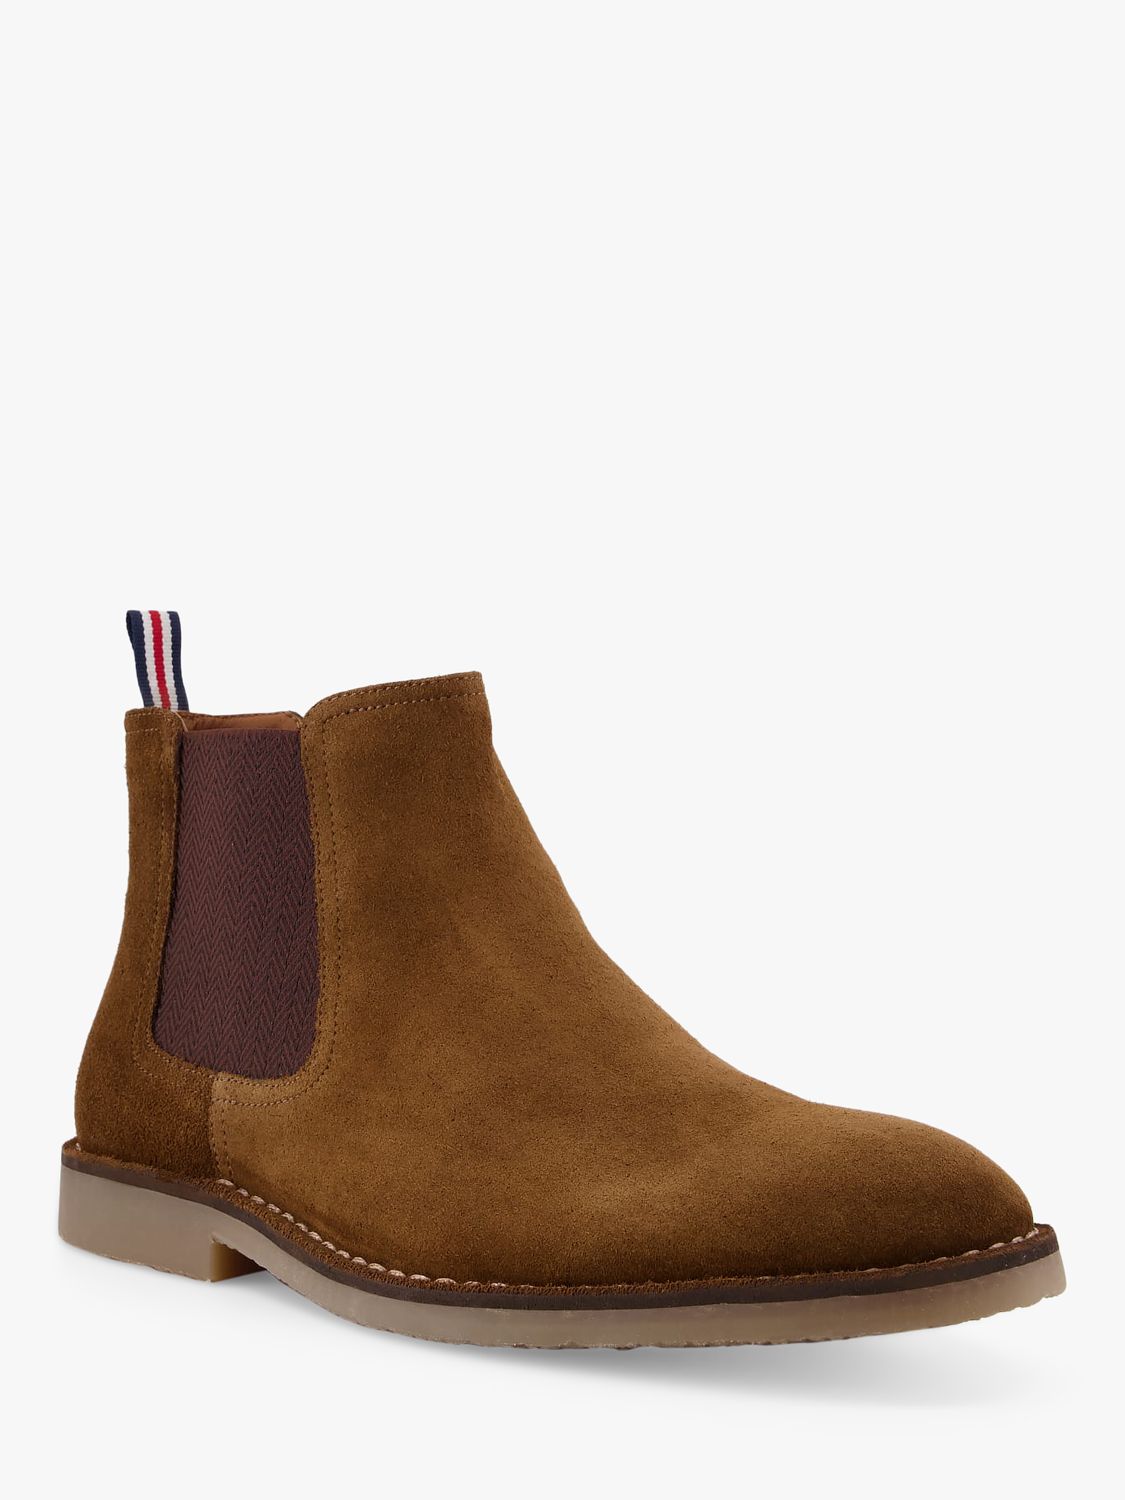 Dune Chai Suede Chelsea Boots, Tan at John Lewis & Partners